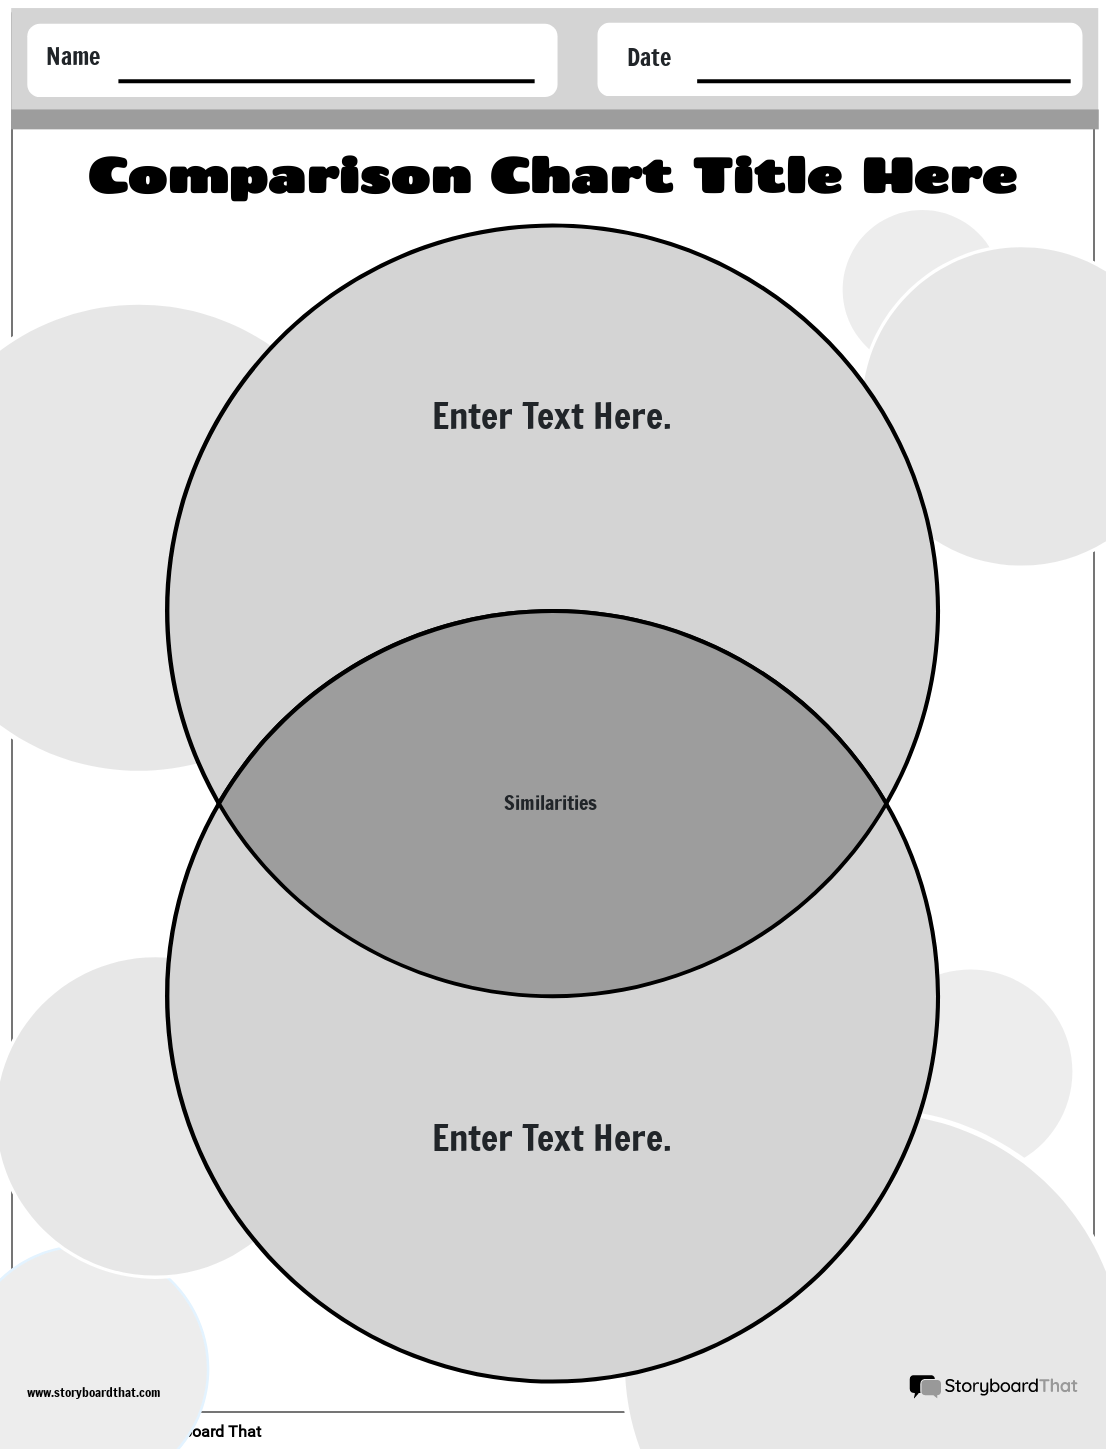 Comparison Chart Template with Overlapping Circles